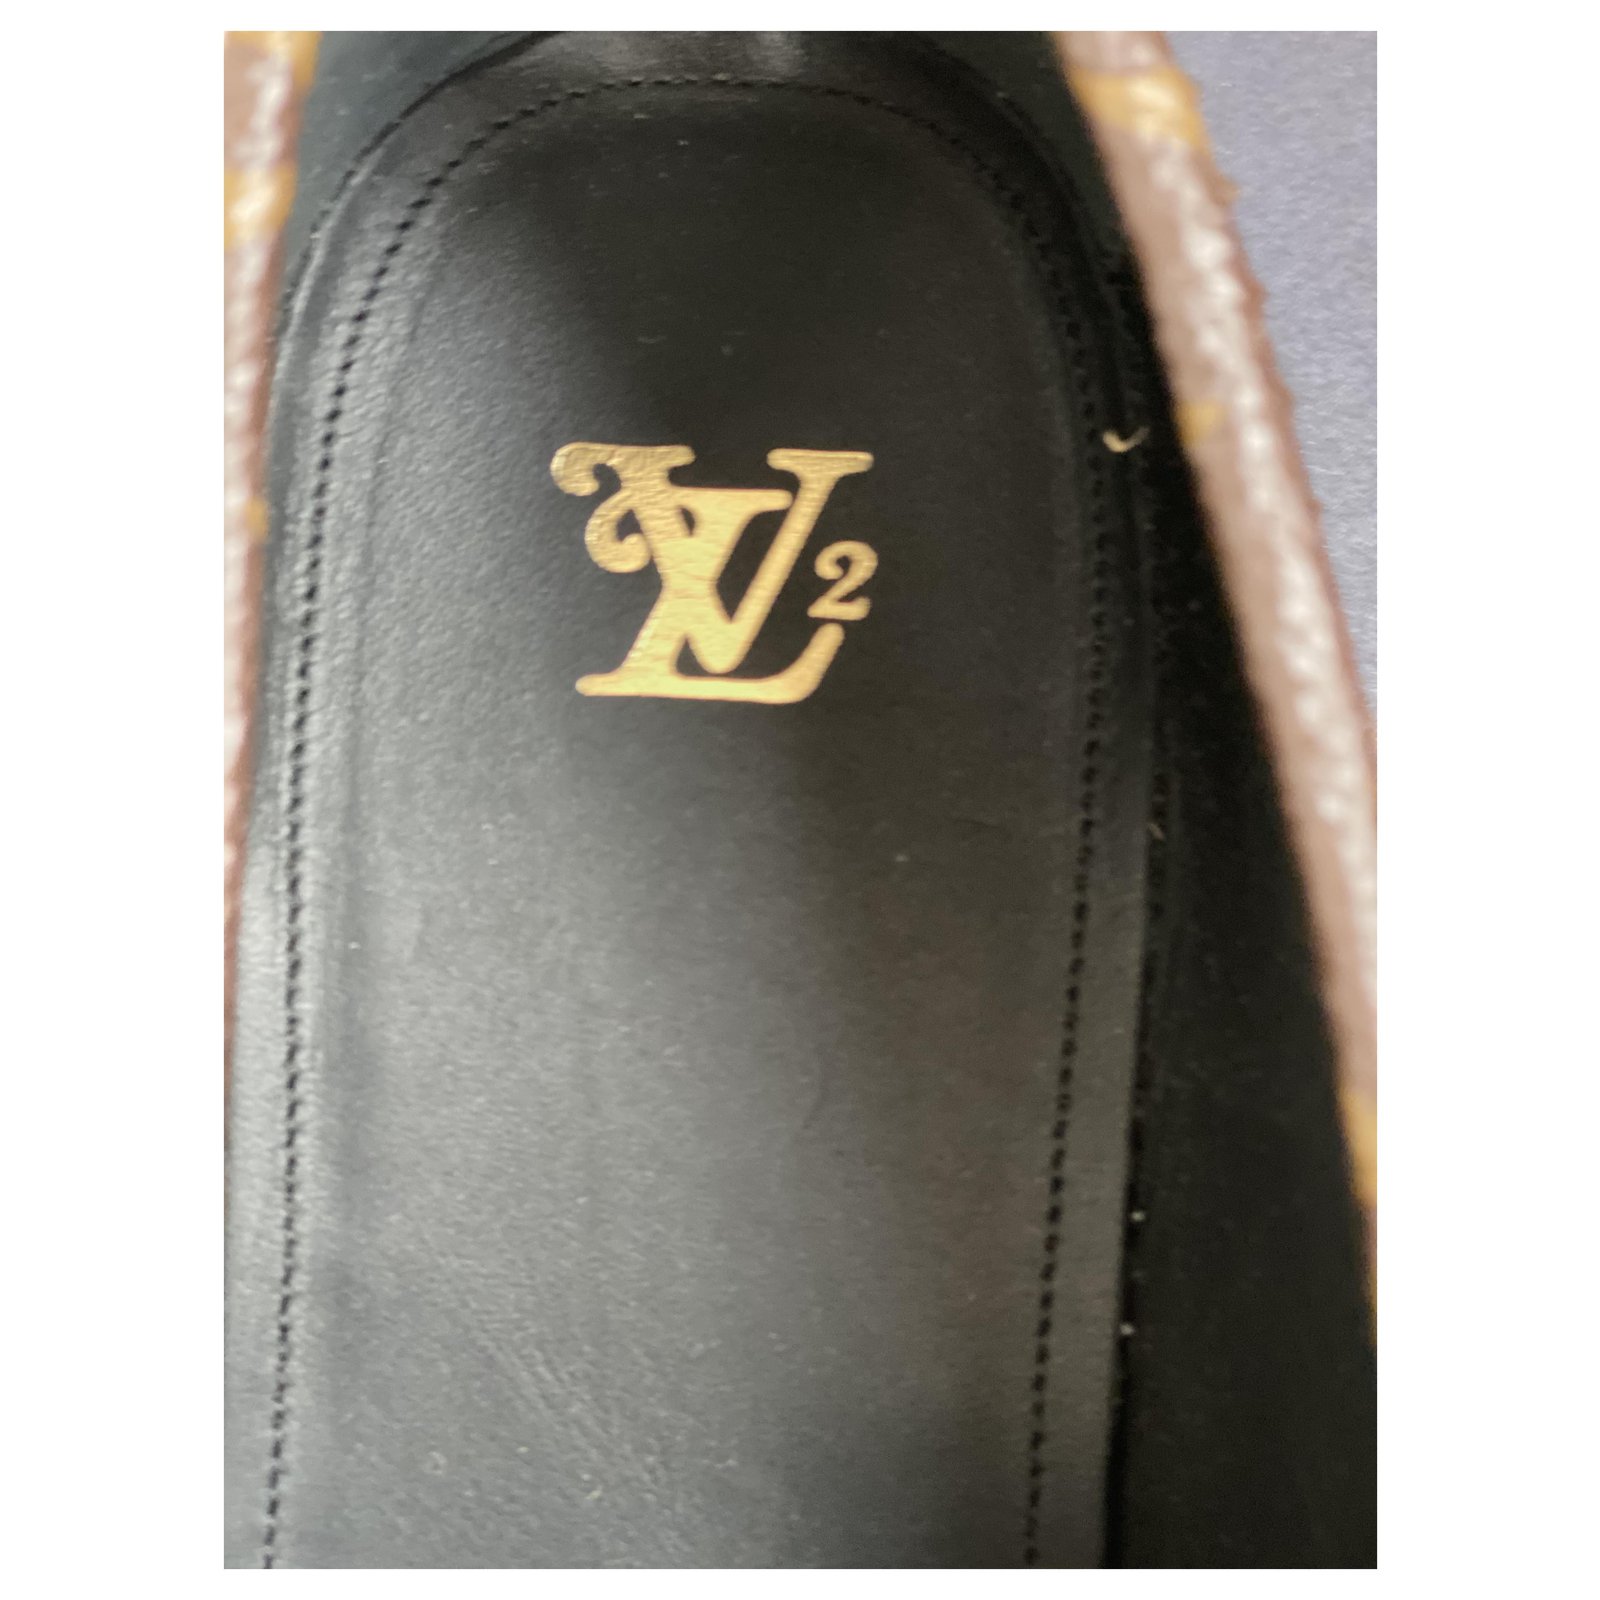 LOUIS VUITTON SHOES LOAFERS WITH BUCKLE 8 42 SUEDE MONOGRAM LOAFERS Brown  ref.491408 - Joli Closet